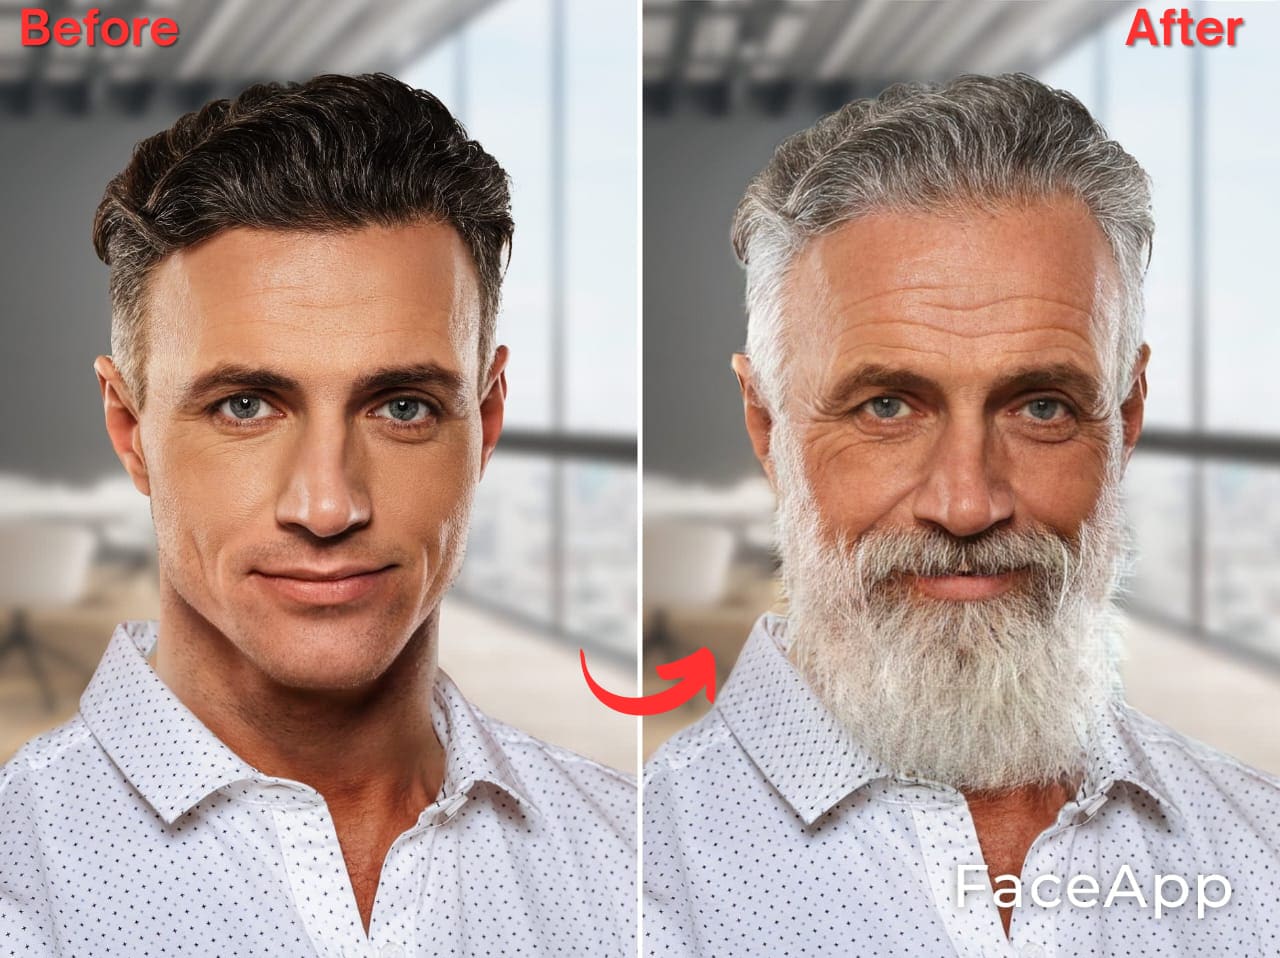 faceapp’s cool old filter example.